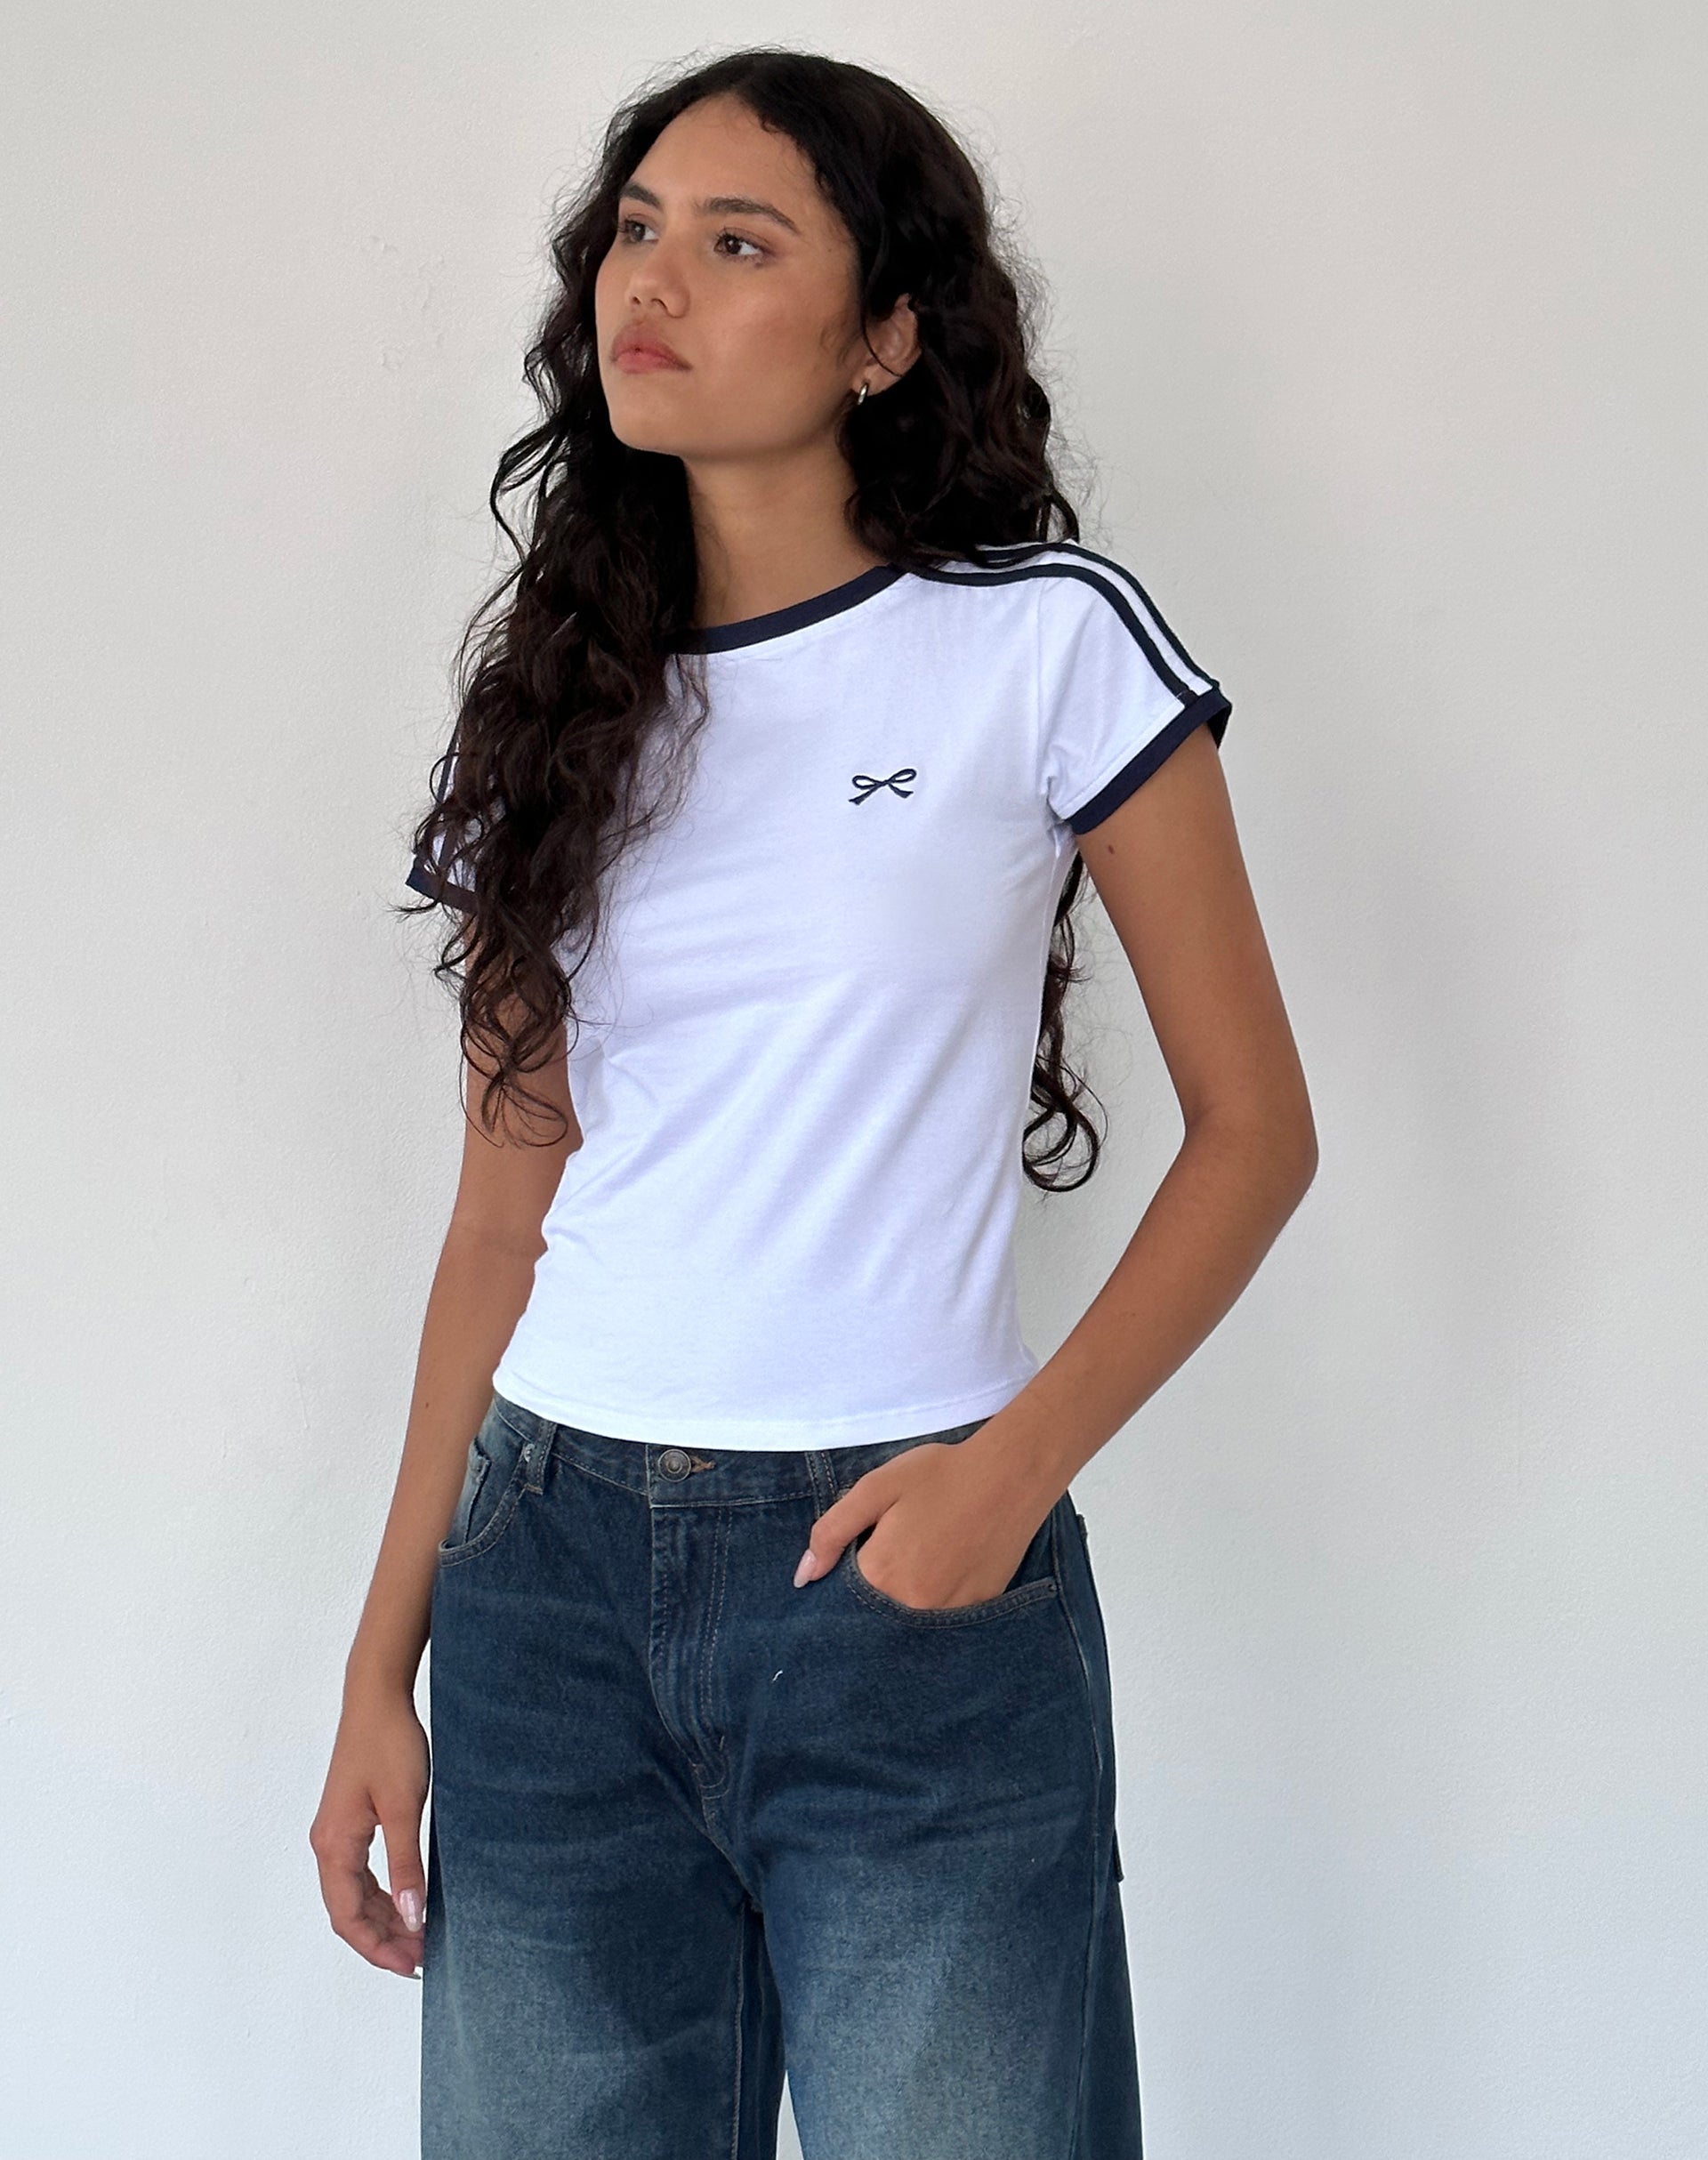 Image of Salda Sporty Tee in White with Navy Binding